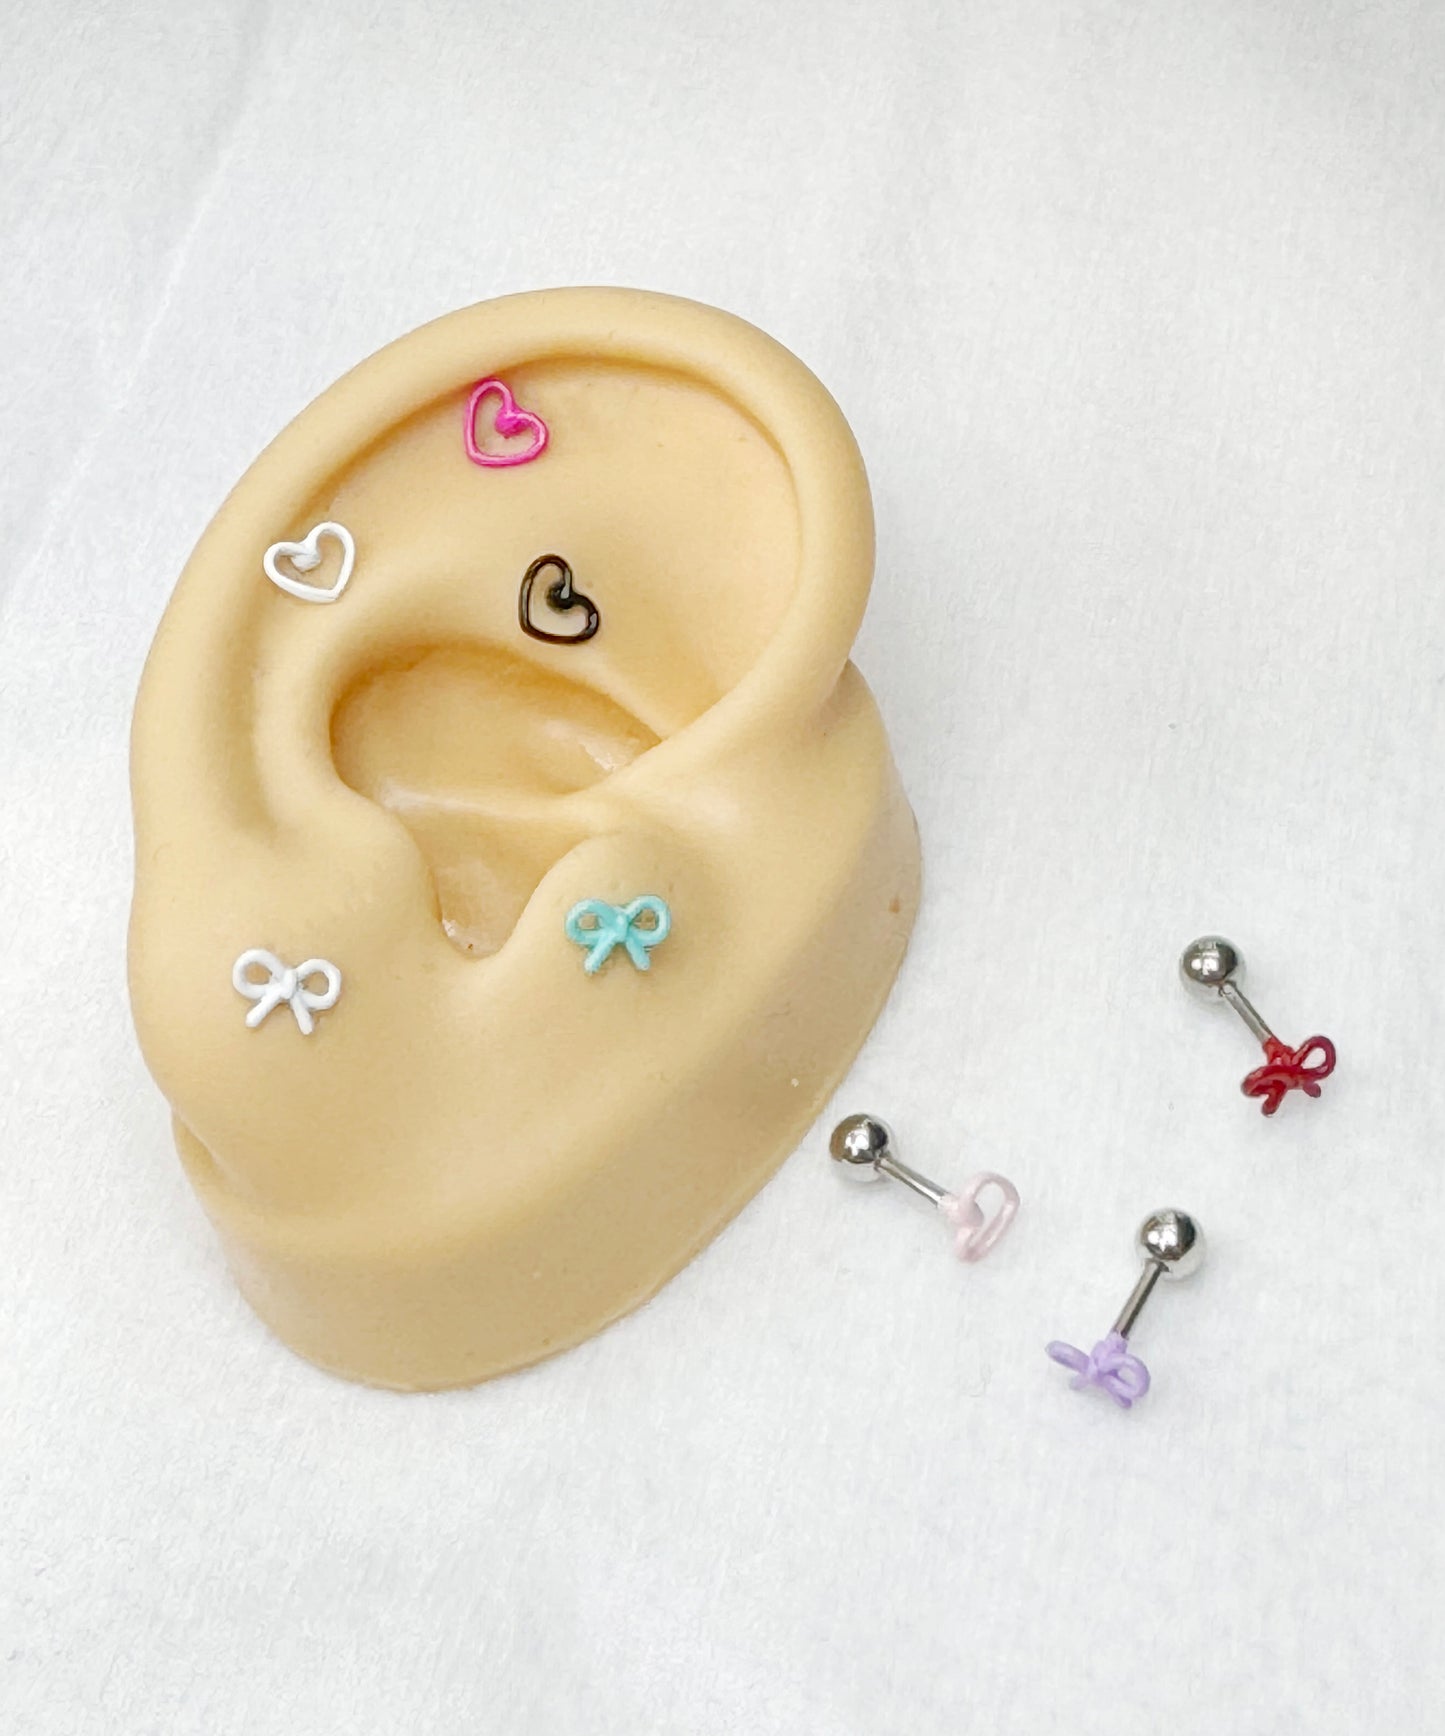 Colorful open heart tiny ear Surgical Steel piercing tiny ear Helix Piercing screw back ball ,Cartilage Piercing,Tragus Ear Jewelry Body Accessories